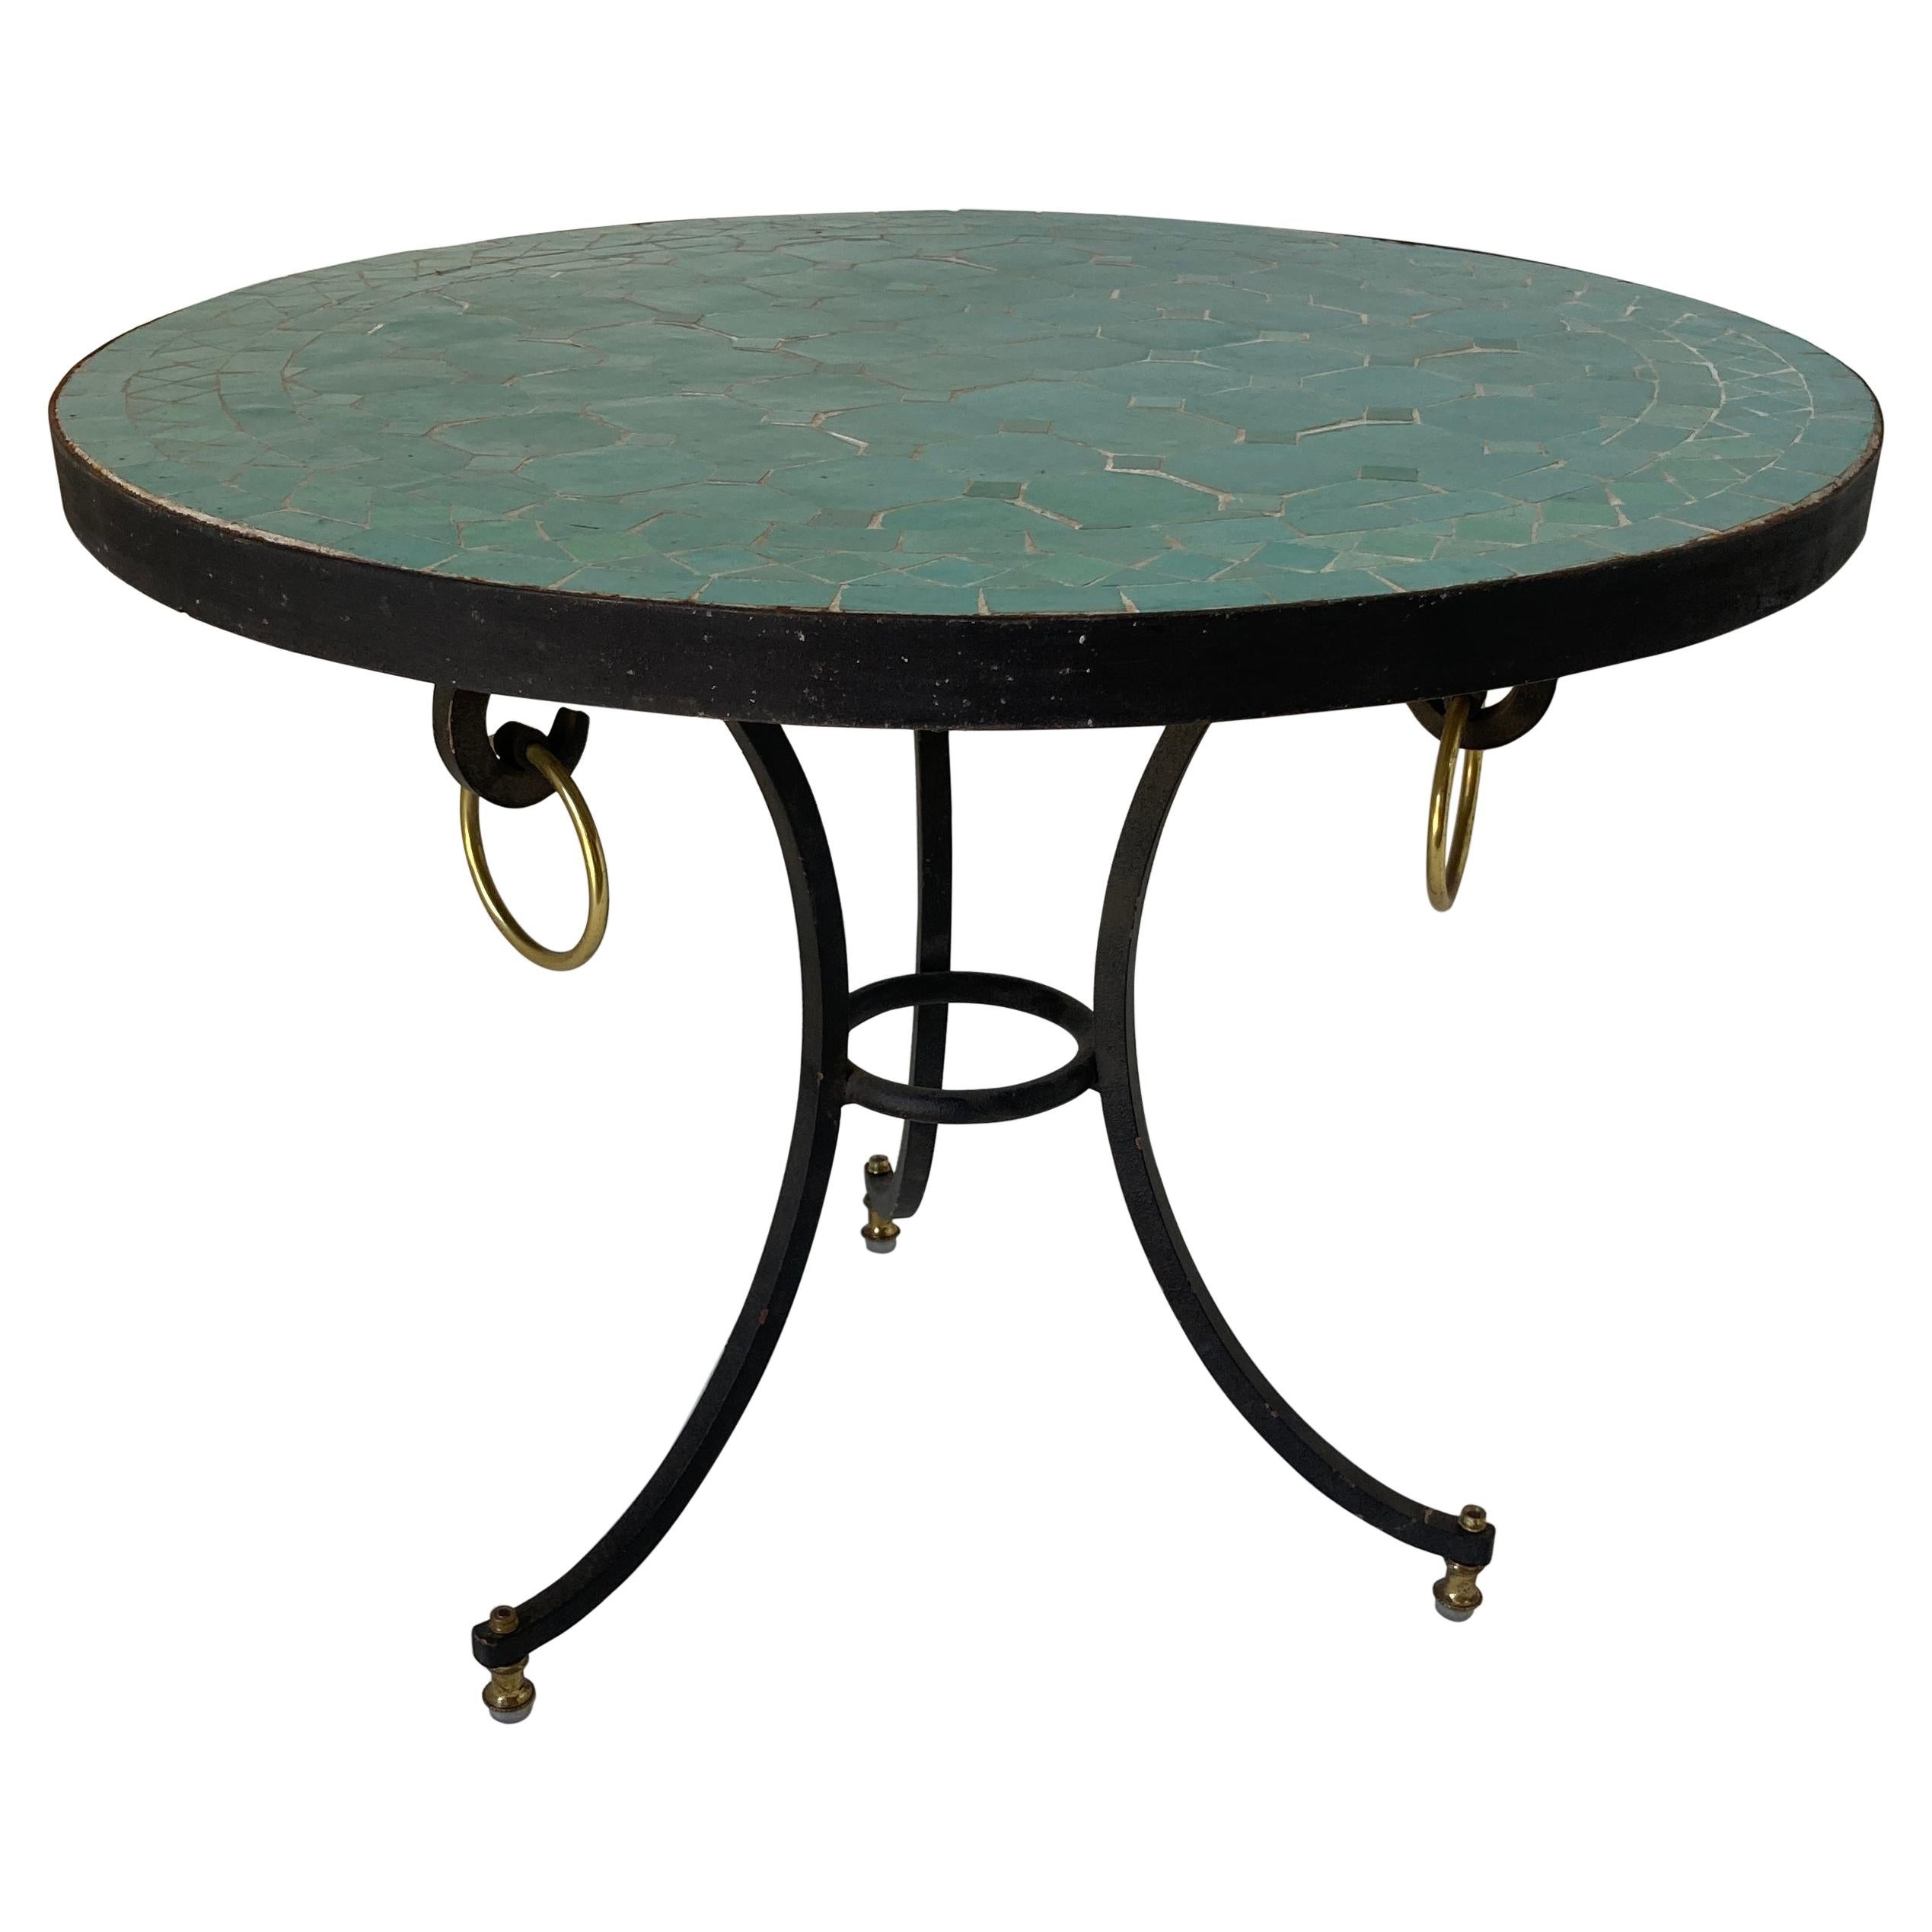 Moroccan Mosaic Tile Teal Color Side Patio Table